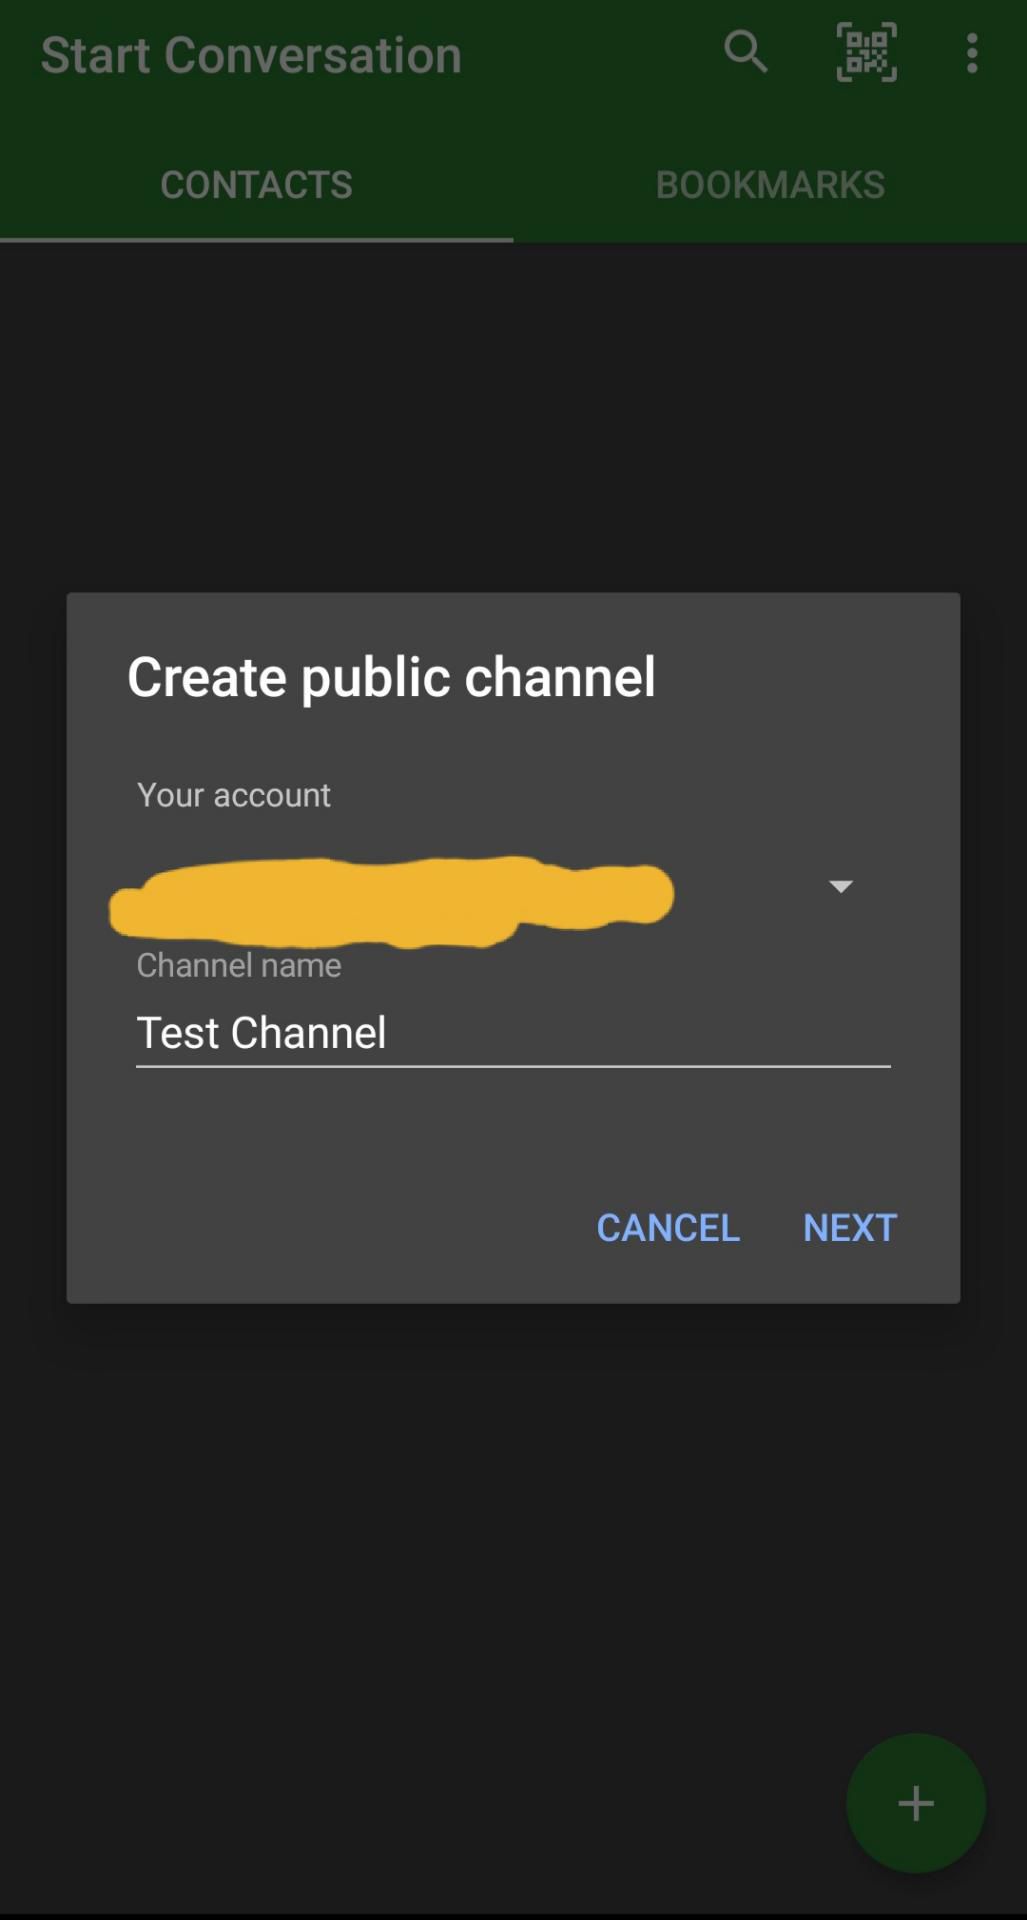 Give Channel a name